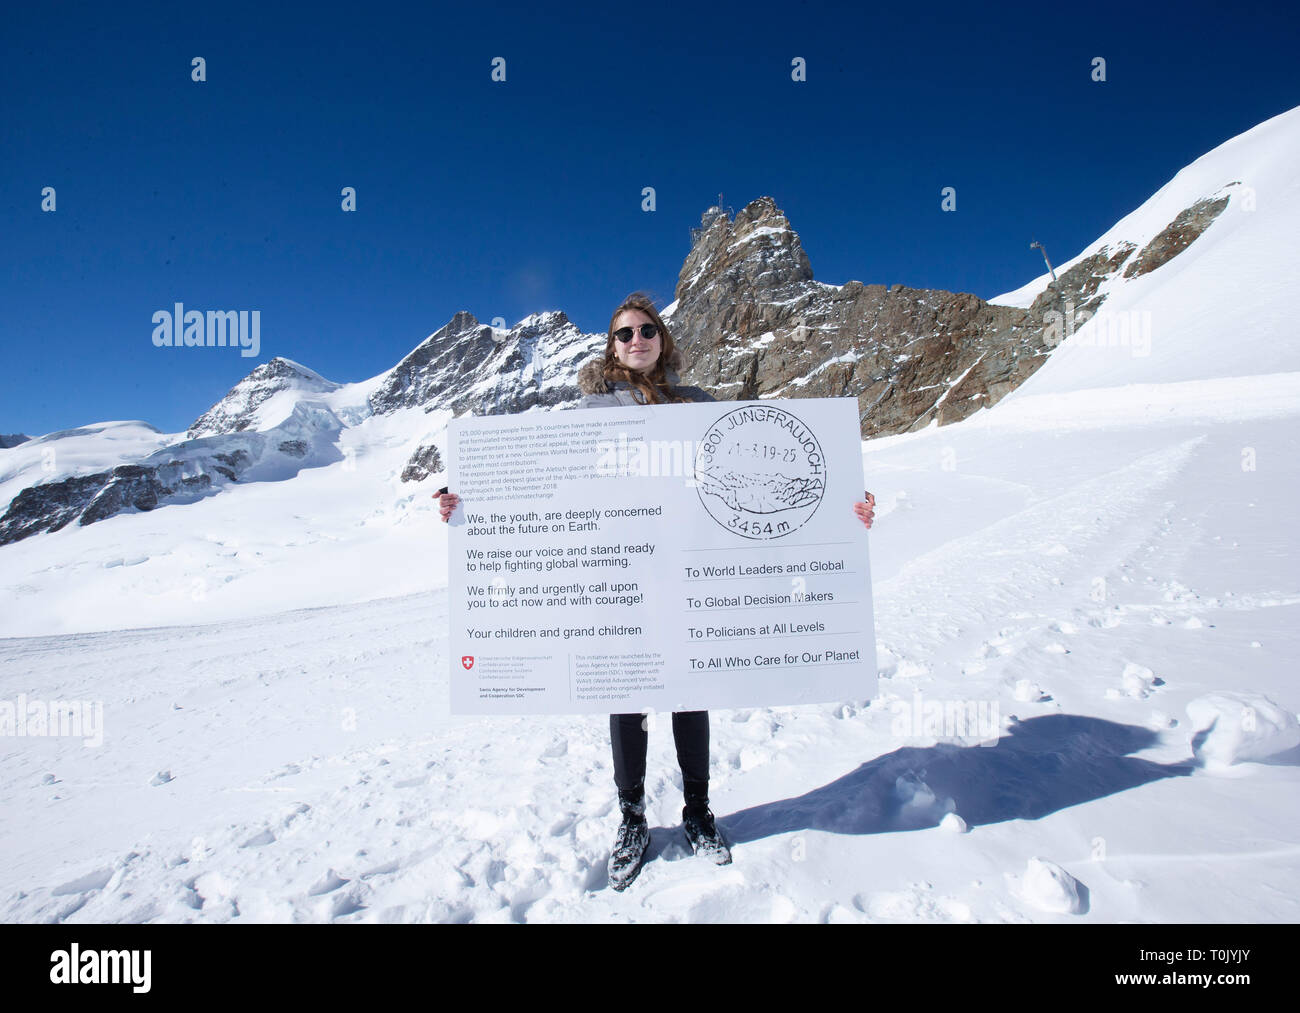 Jungfraujoch. 20th Mar, 2019. Swiss teenager Selma Schellenberg shows a copy of a postcard calling for action against climate change on the Aletsch glacier under Jungfraujoch in Switzerland, on March 20, 2019. Some 900 postcards from youths all over the world were stamped and sent on Wednesday from Europe's highest postbox on the Jungfraujoch peak, Switzerland, to global leaders, calling for action against climate change. Credit: Xu Jinquan/Xinhua/Alamy Live News Stock Photo